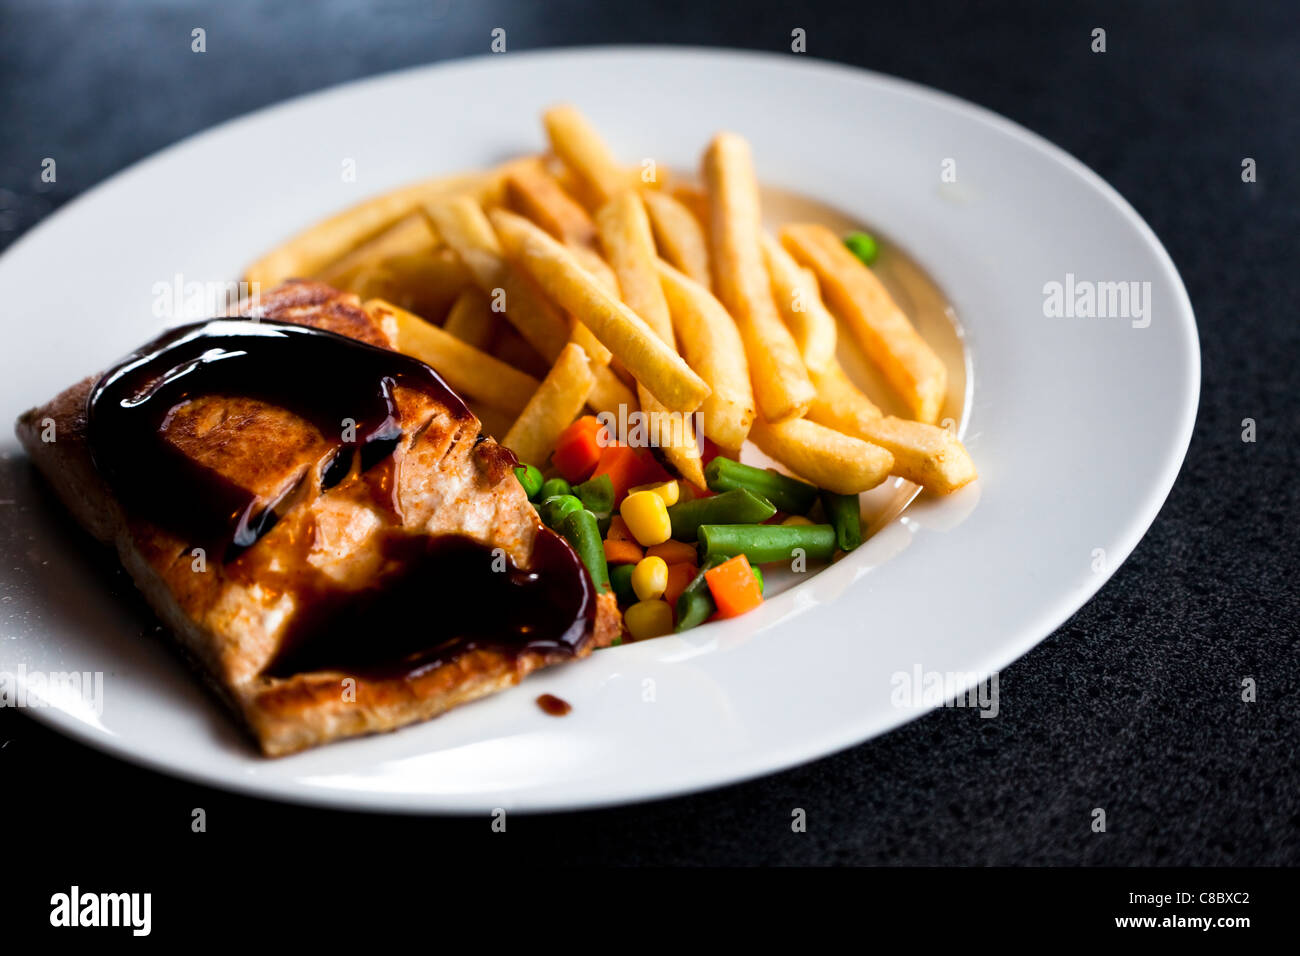 salmon steak with French Fries Stock Photo